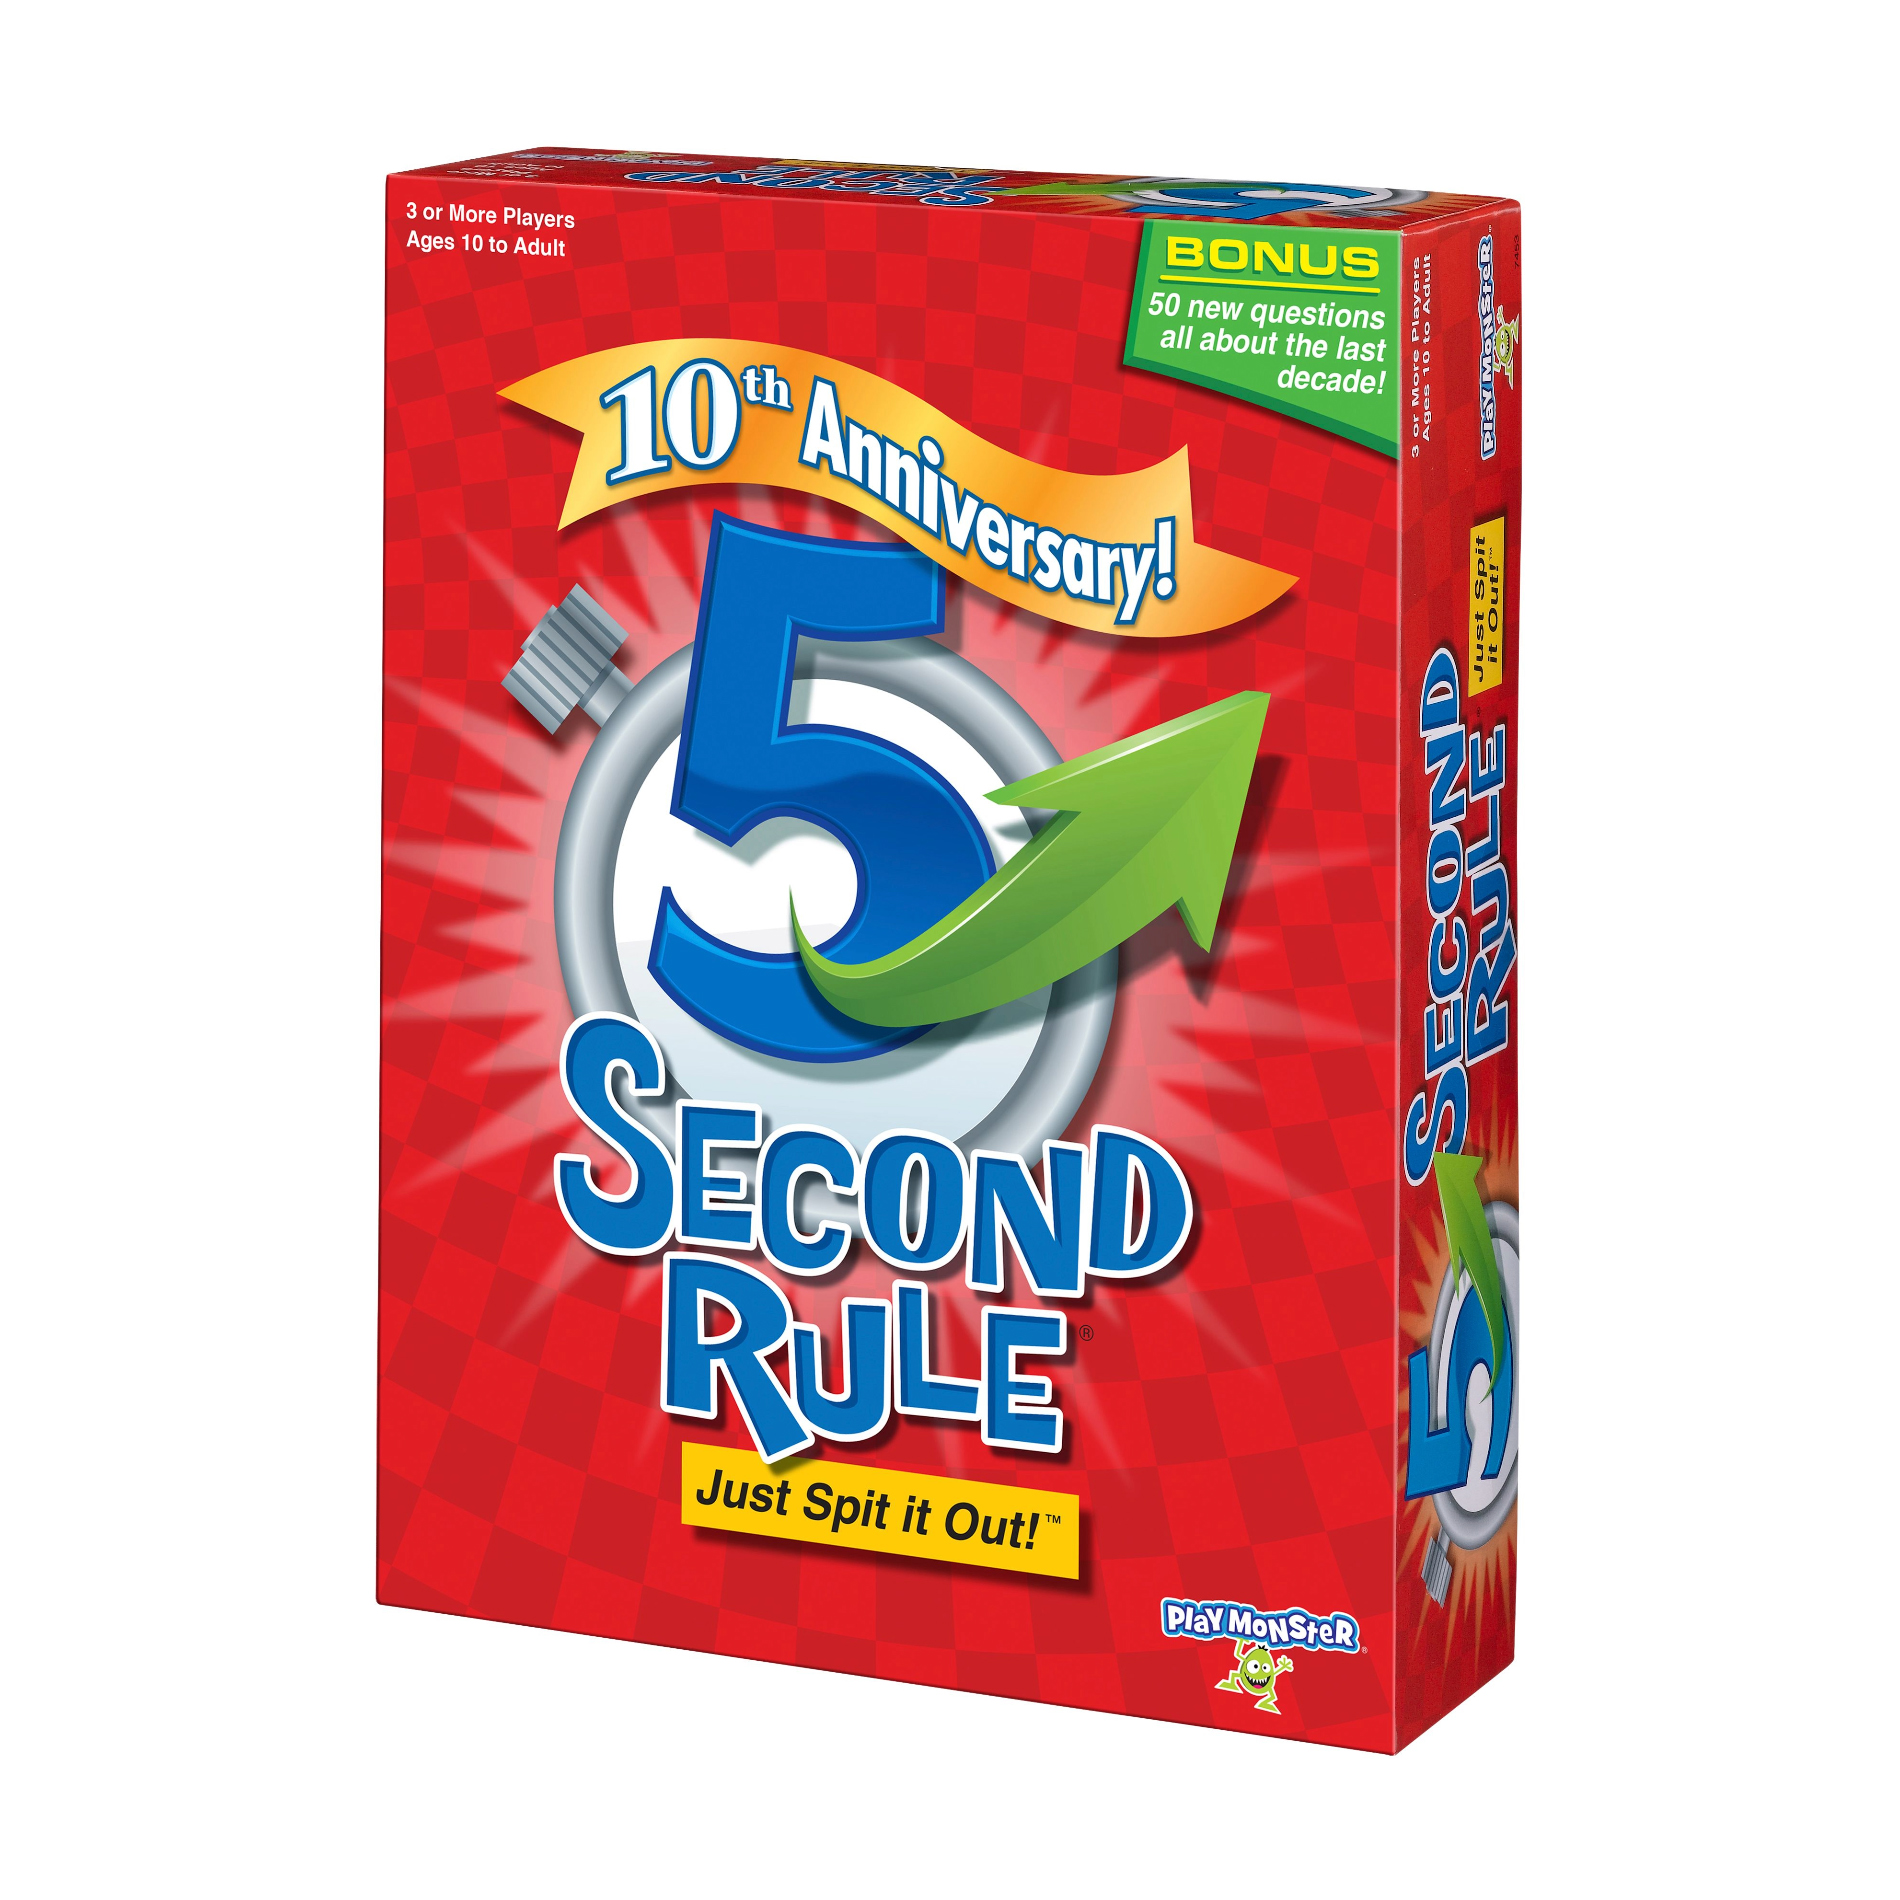 PlayMonster 5 Second Rule - 10th Anniversary Edition - image 2 of 5